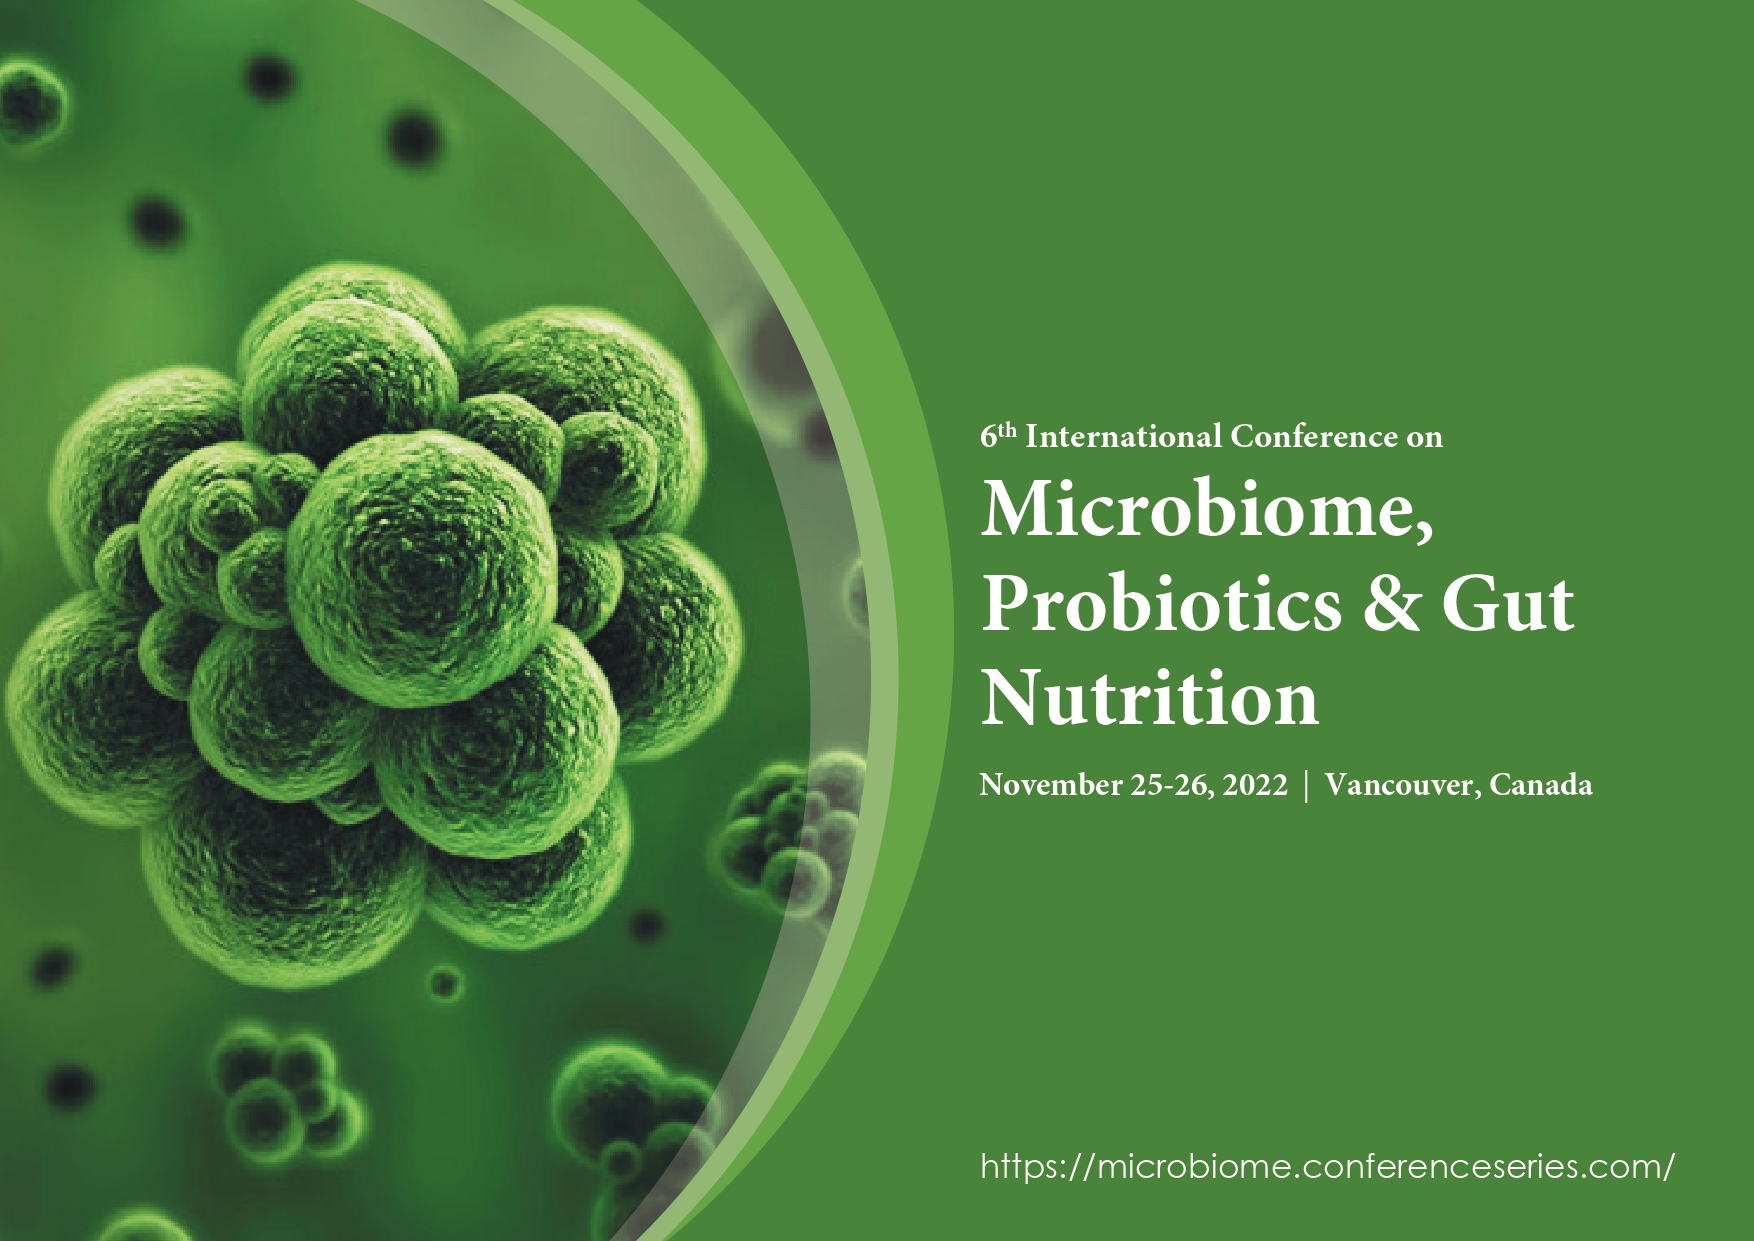 6th International Conference on Microbiome, Probiotics and Gut Nutrition, Vancouver, British Columbia, Canada